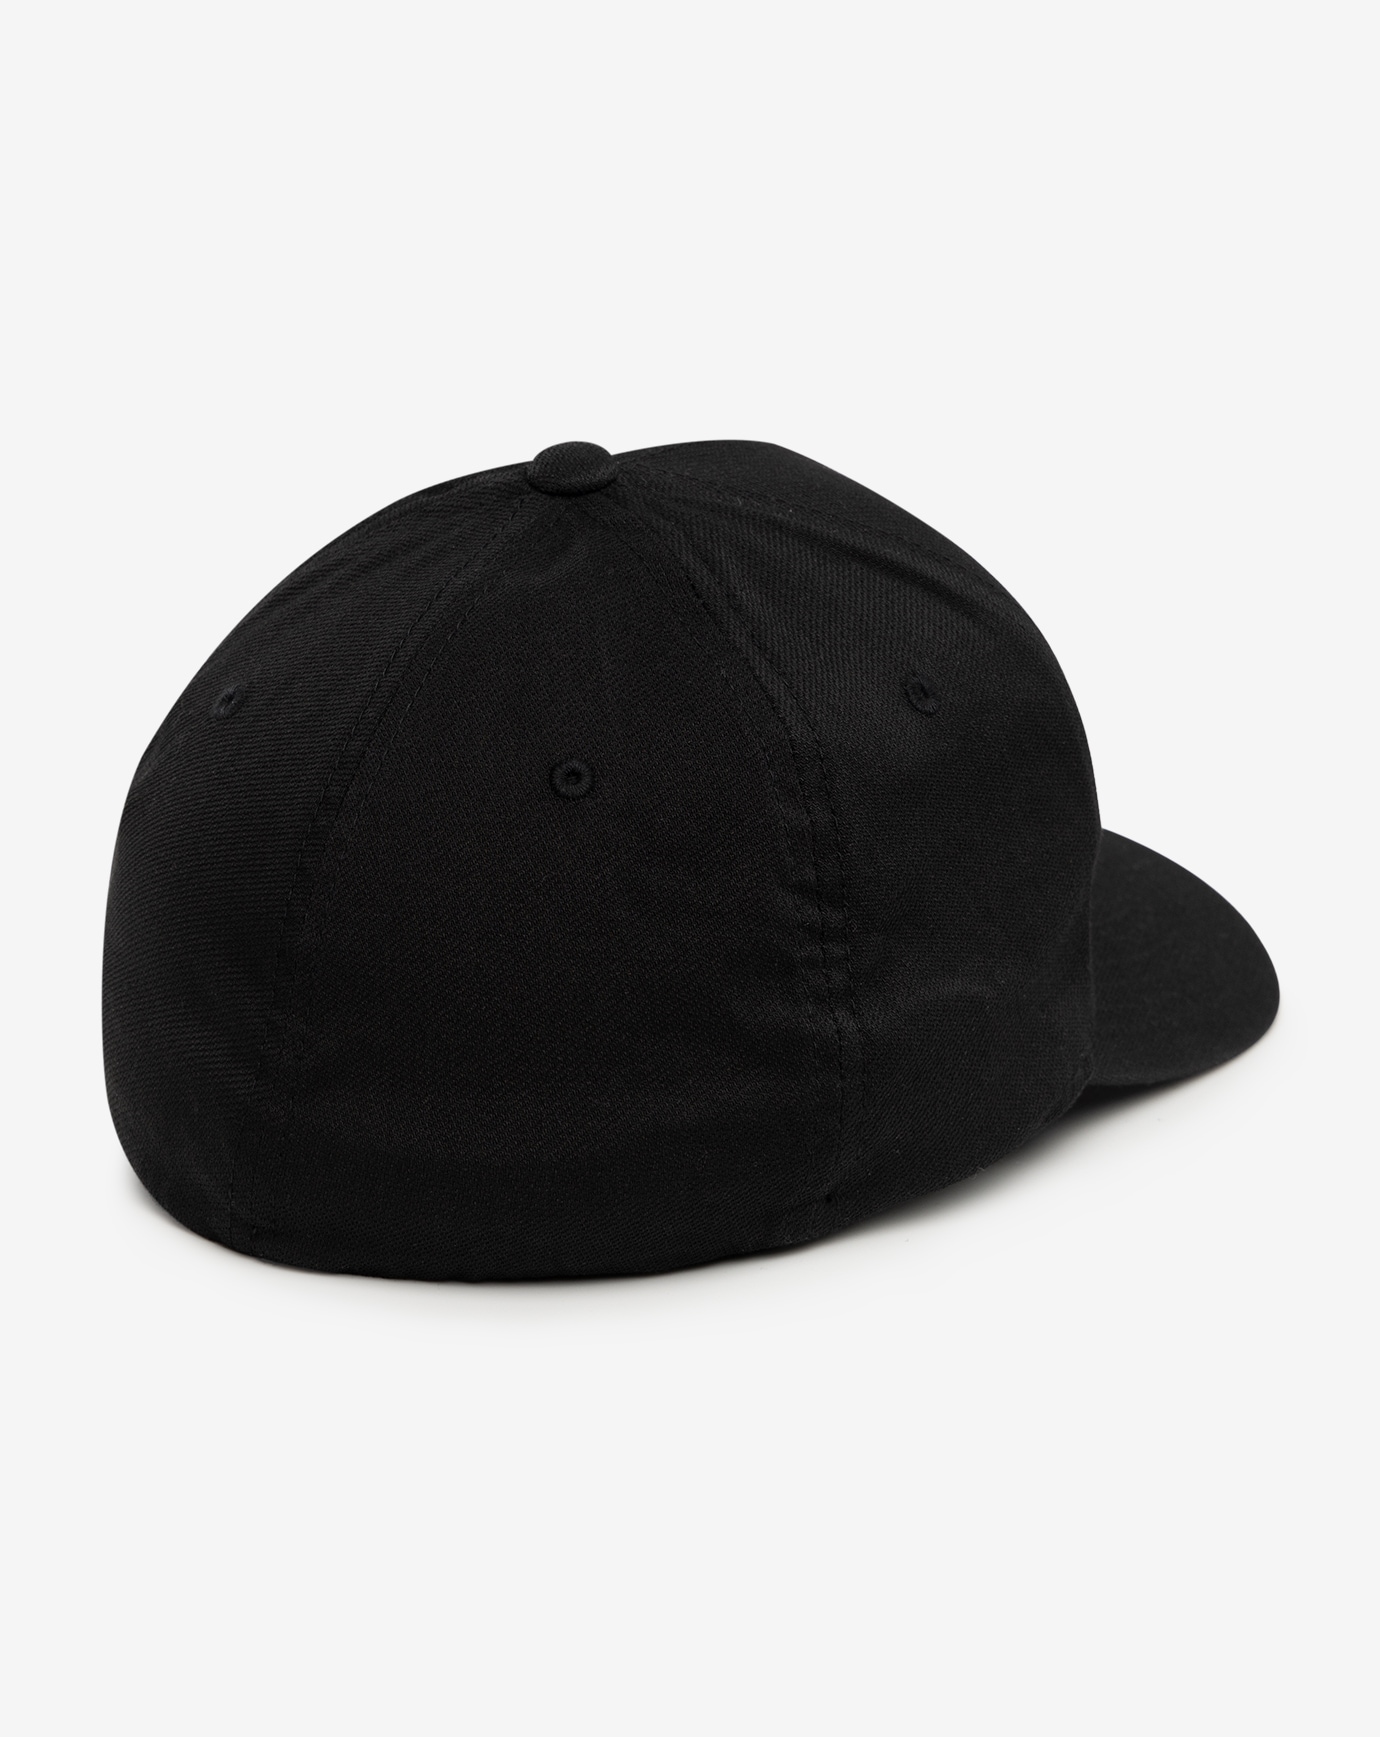 DOPP FITTED HAT Image Thumbnail 3